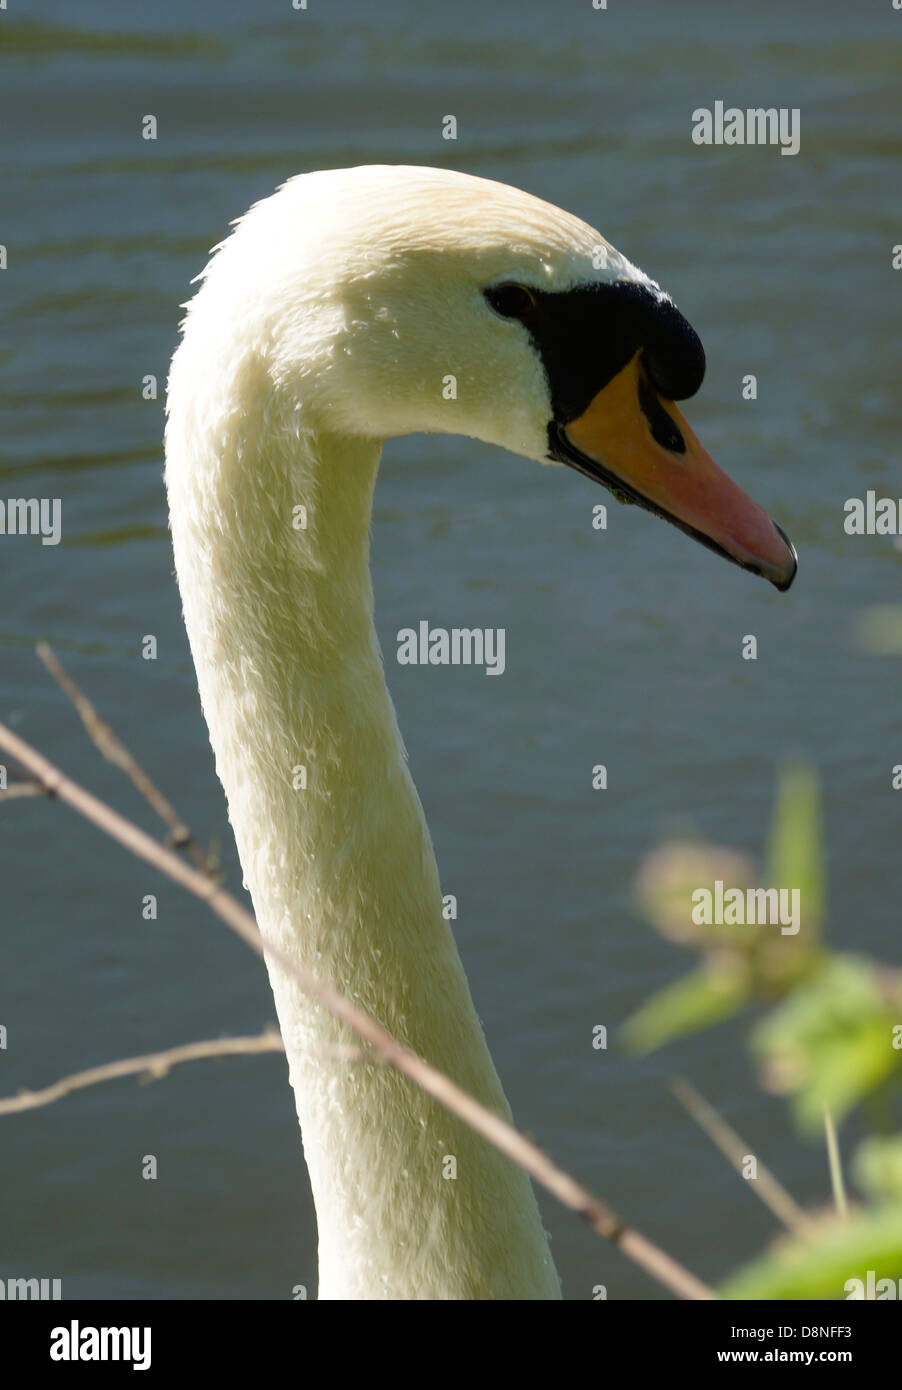 Swans head and Neck Side on Stock Photo